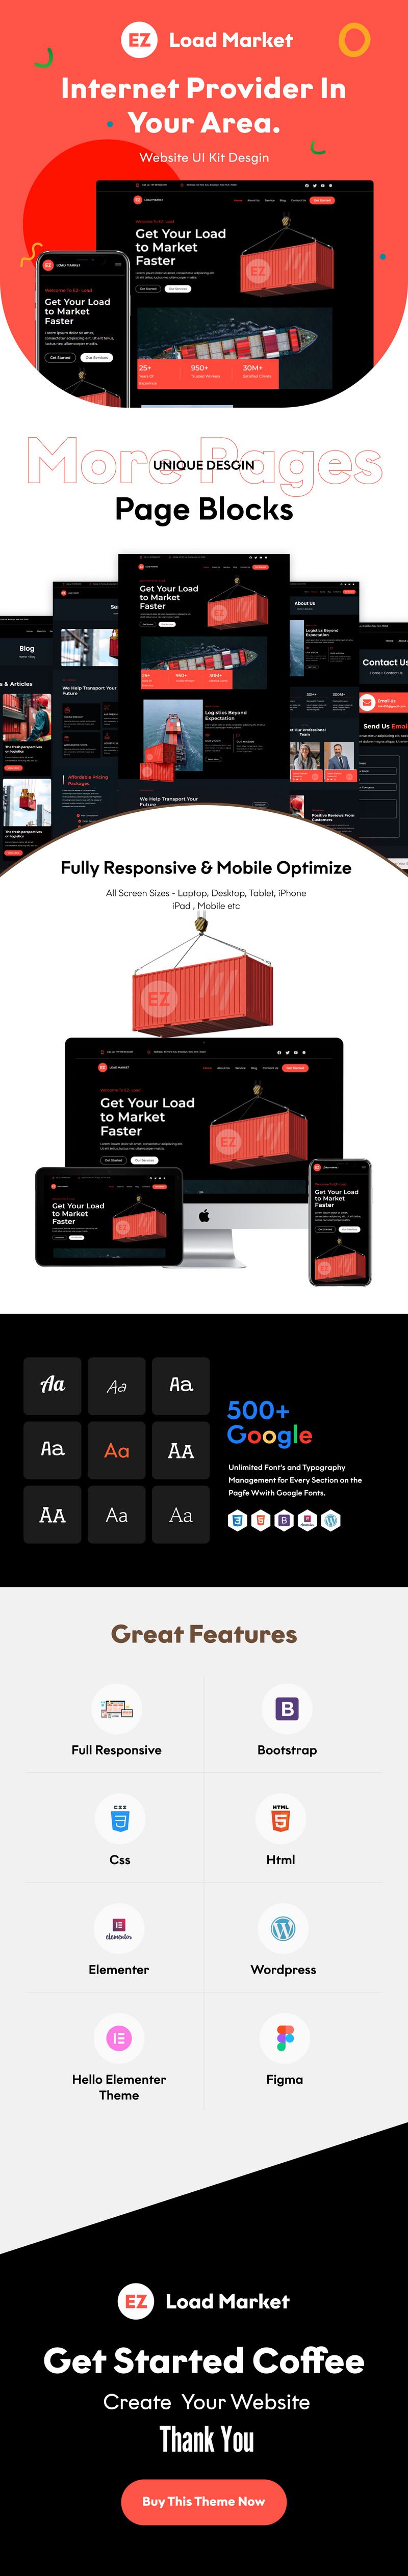 EZ-Load-Market: Amplify Your Business with the EZ-Load-Market WordPress Theme - Features Image 1